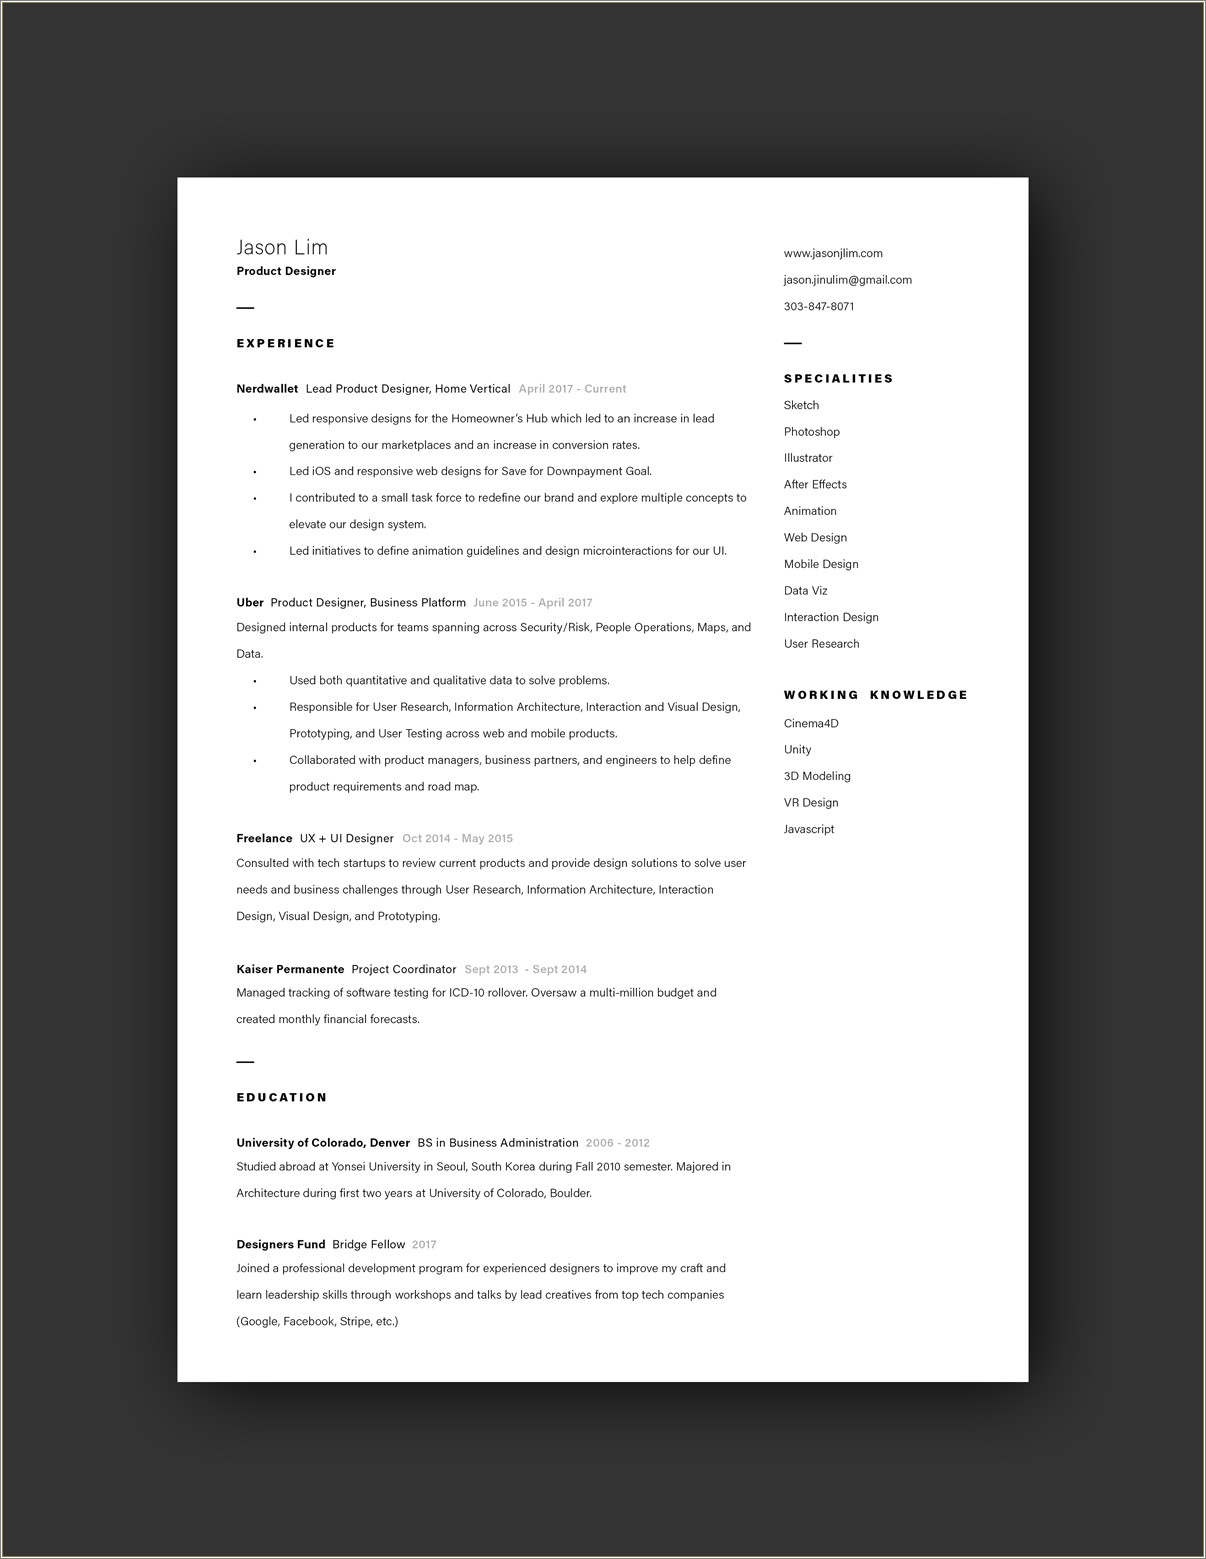 Are Links In Resumes A Good Idea